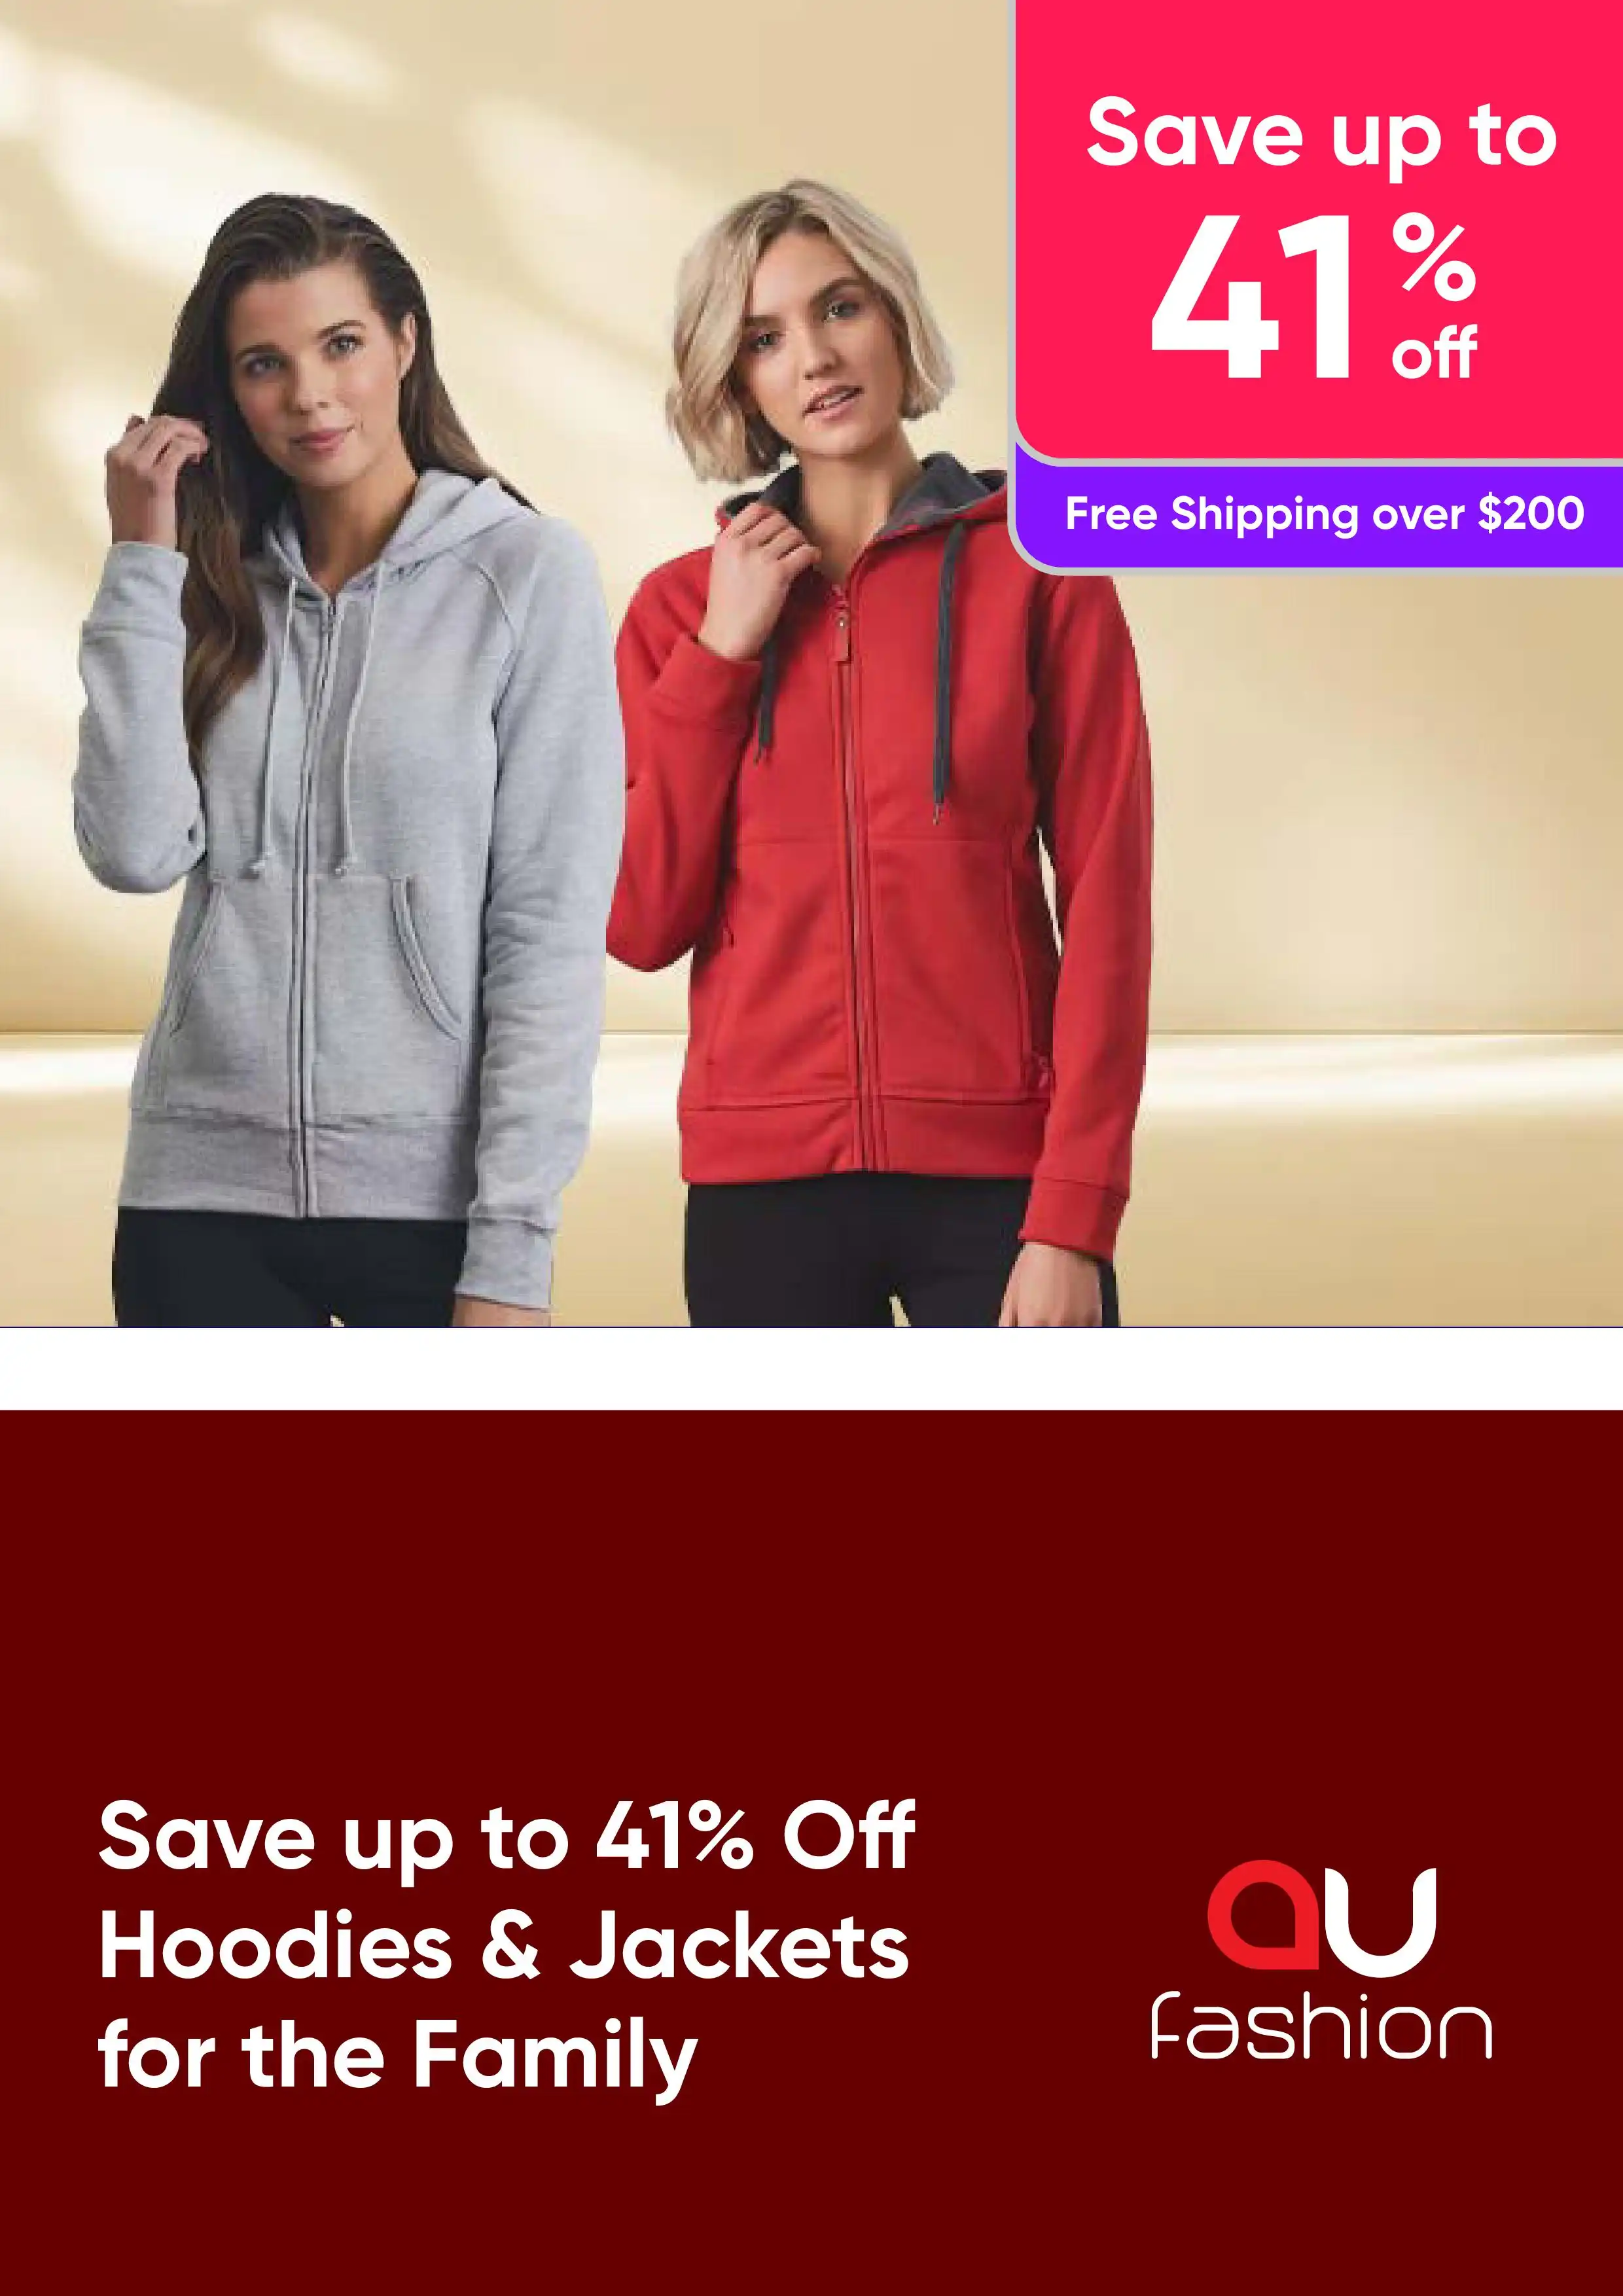 Save up to 41% off Hoodies & Jackets for the Family